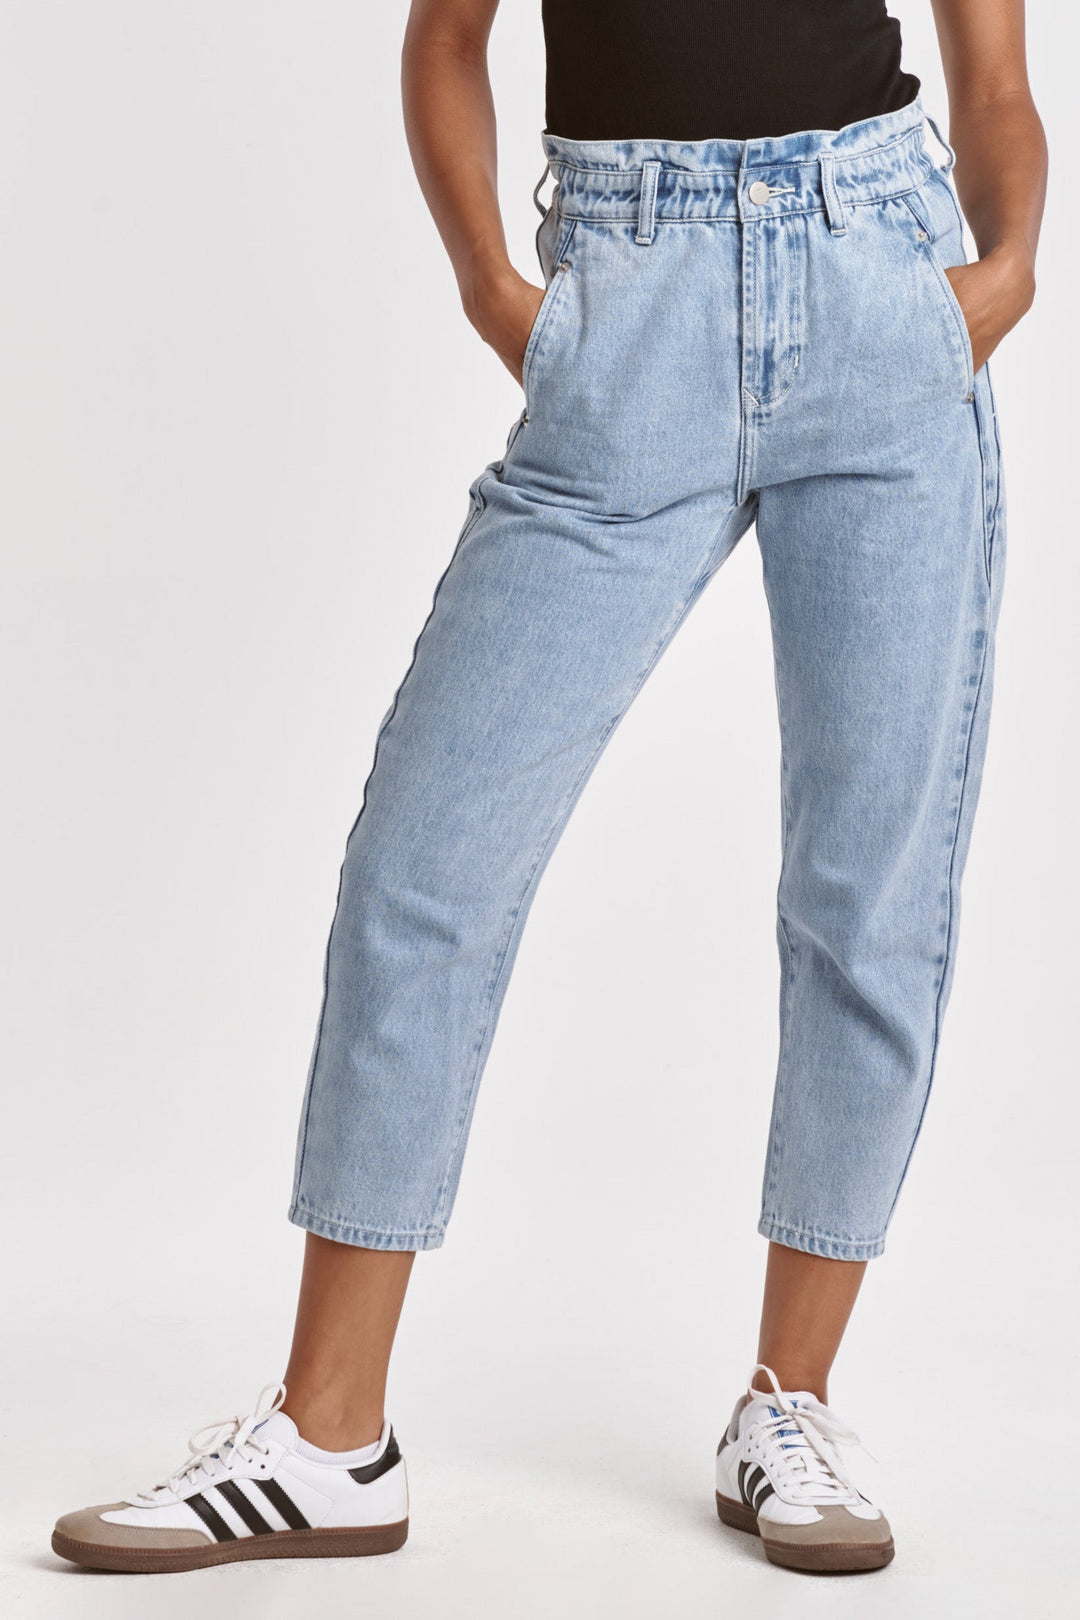 valerie-ultra-high-rise-cropped-baggy-jeans-zylo